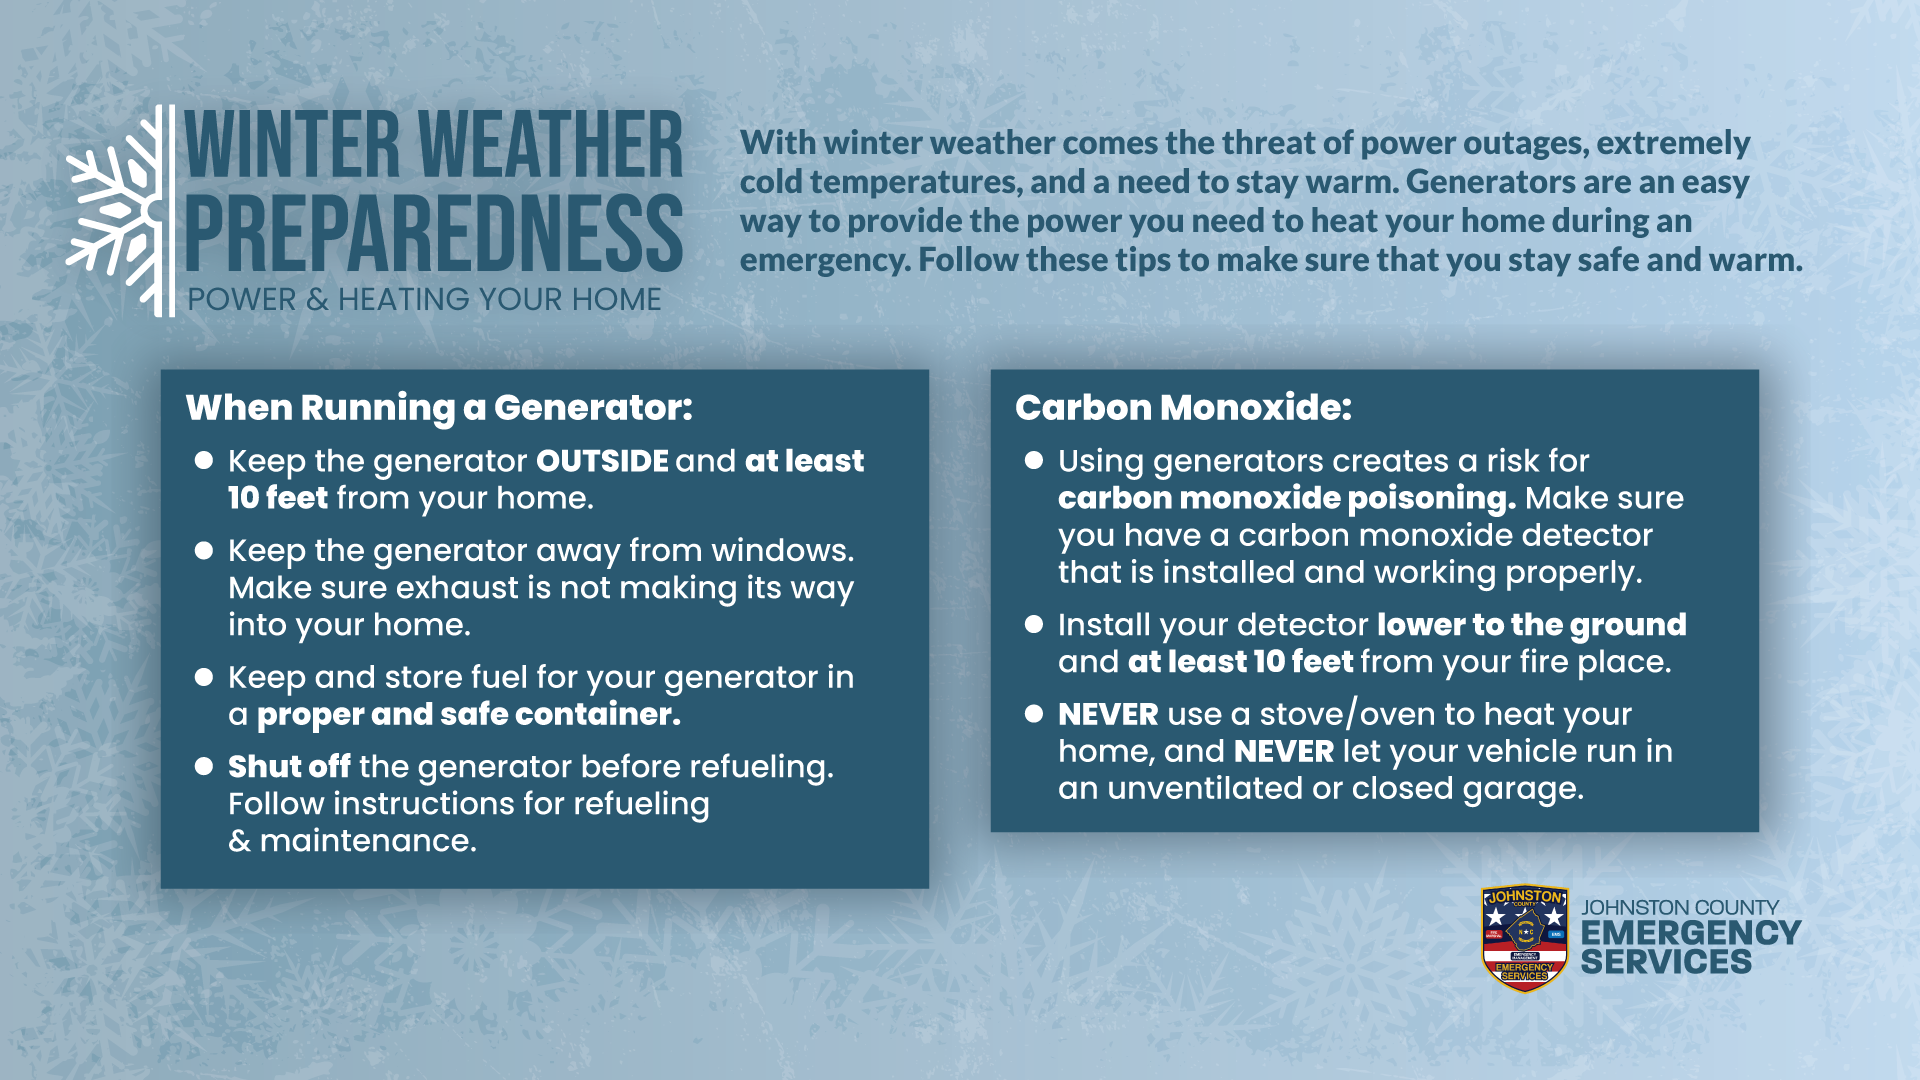 Winter Weather Preparedness Power & Heating Your Home